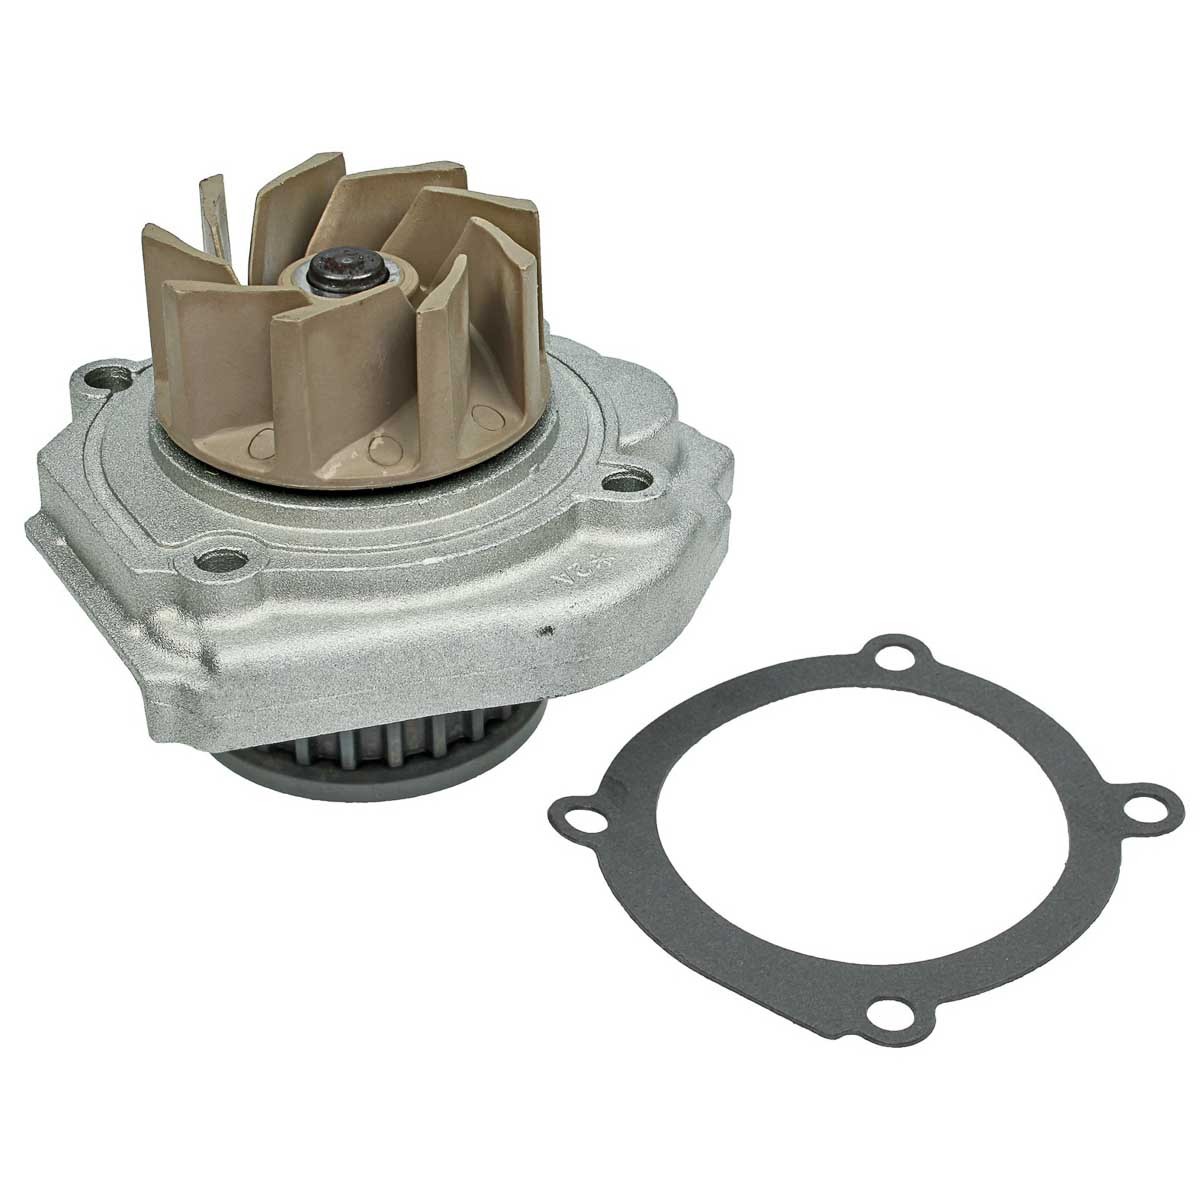 MEYLE 213 220 0022 Water pump JEEP experience and price